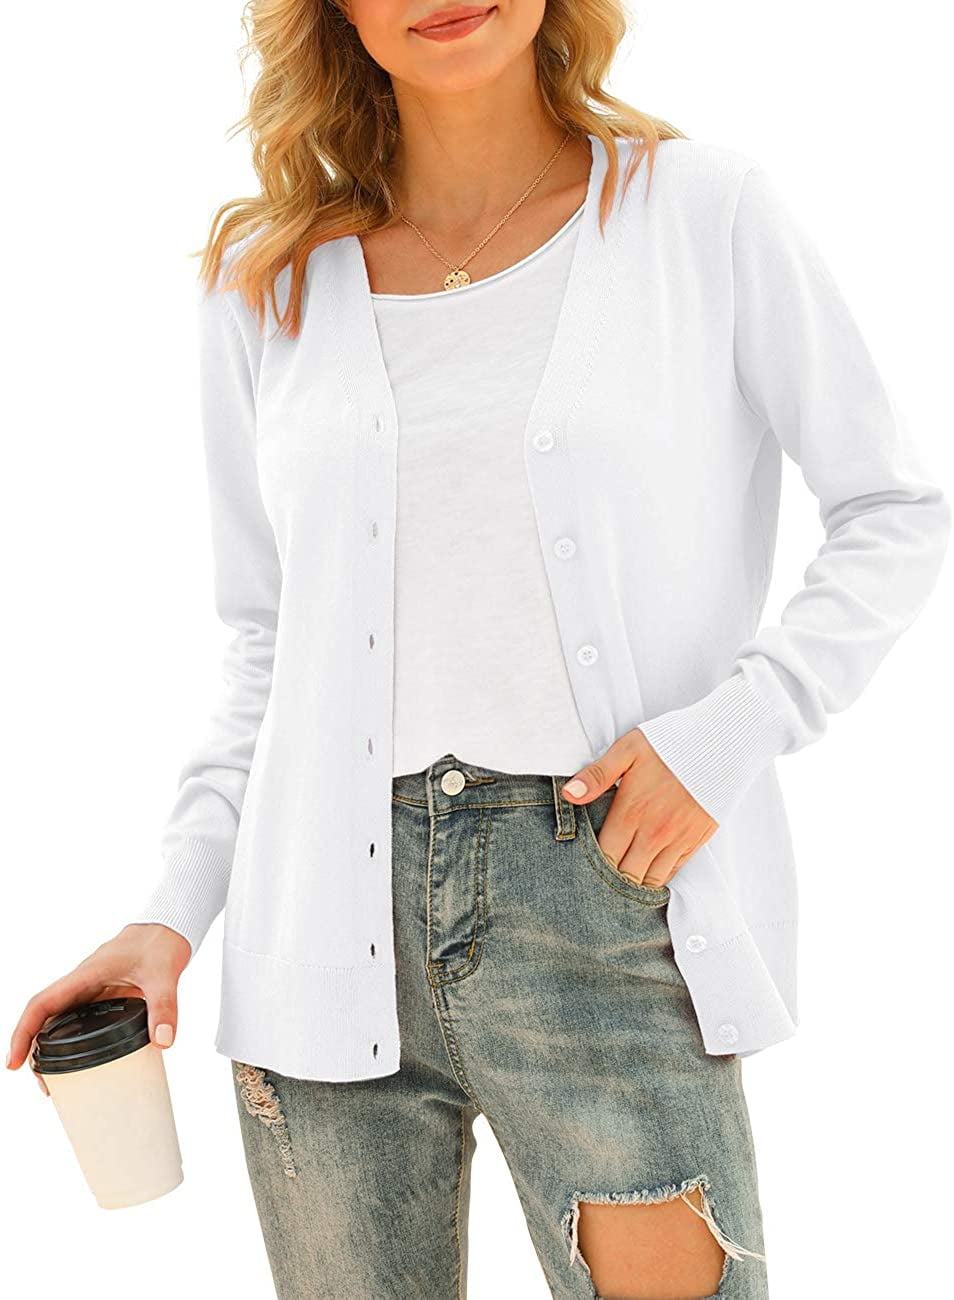 Womens V Neck Button Down Long Sleeve Basic Soft Knit Cardigan Sweater